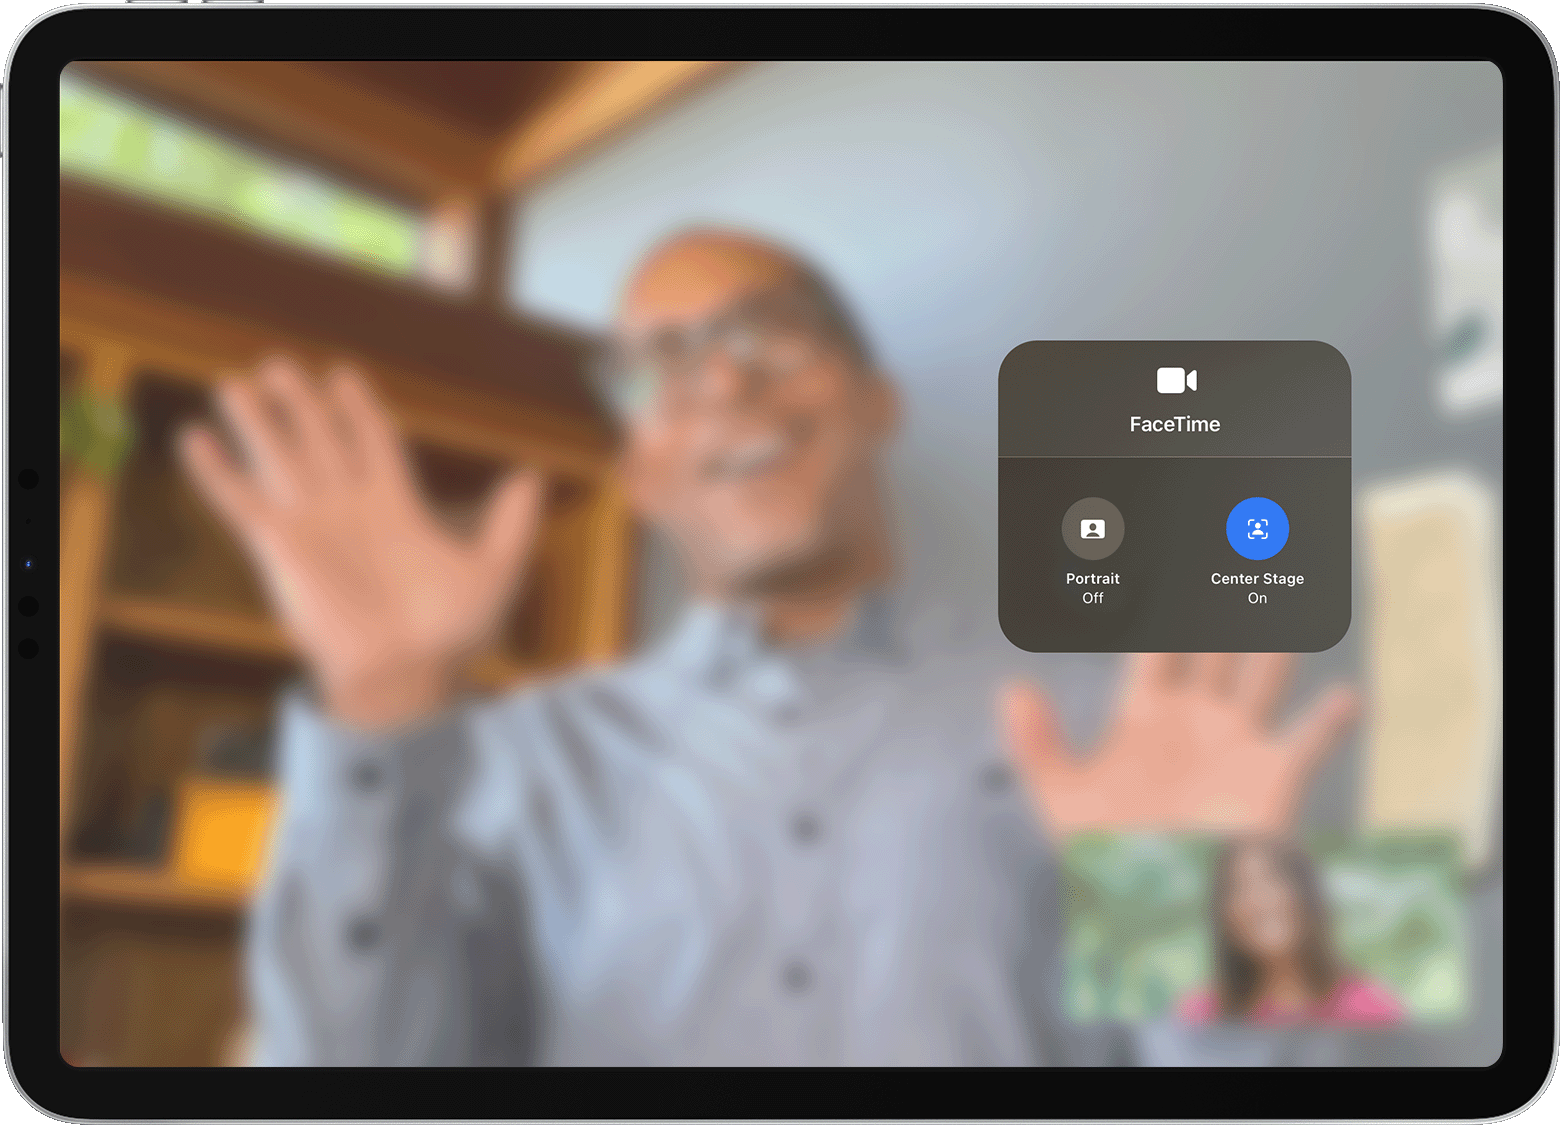 iPad screen shows a FaceTime call with the Video Effects options visible